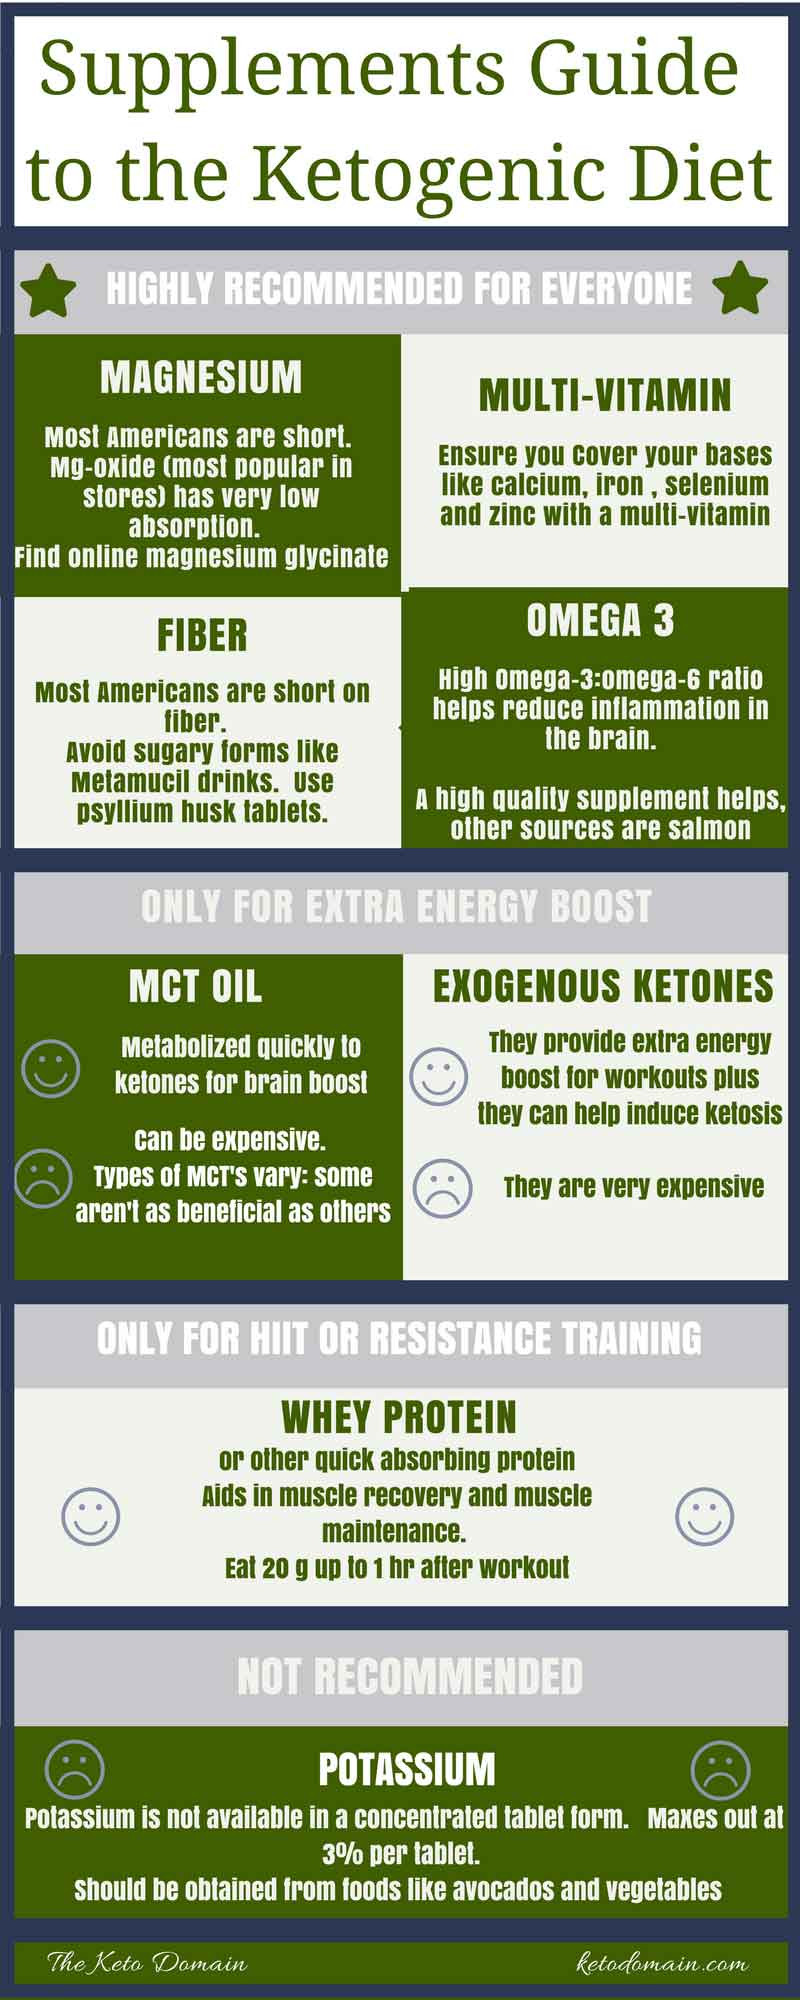 Keto Diet Food List For Beginners
 Beginners Guide Supplements for the Keto Diet